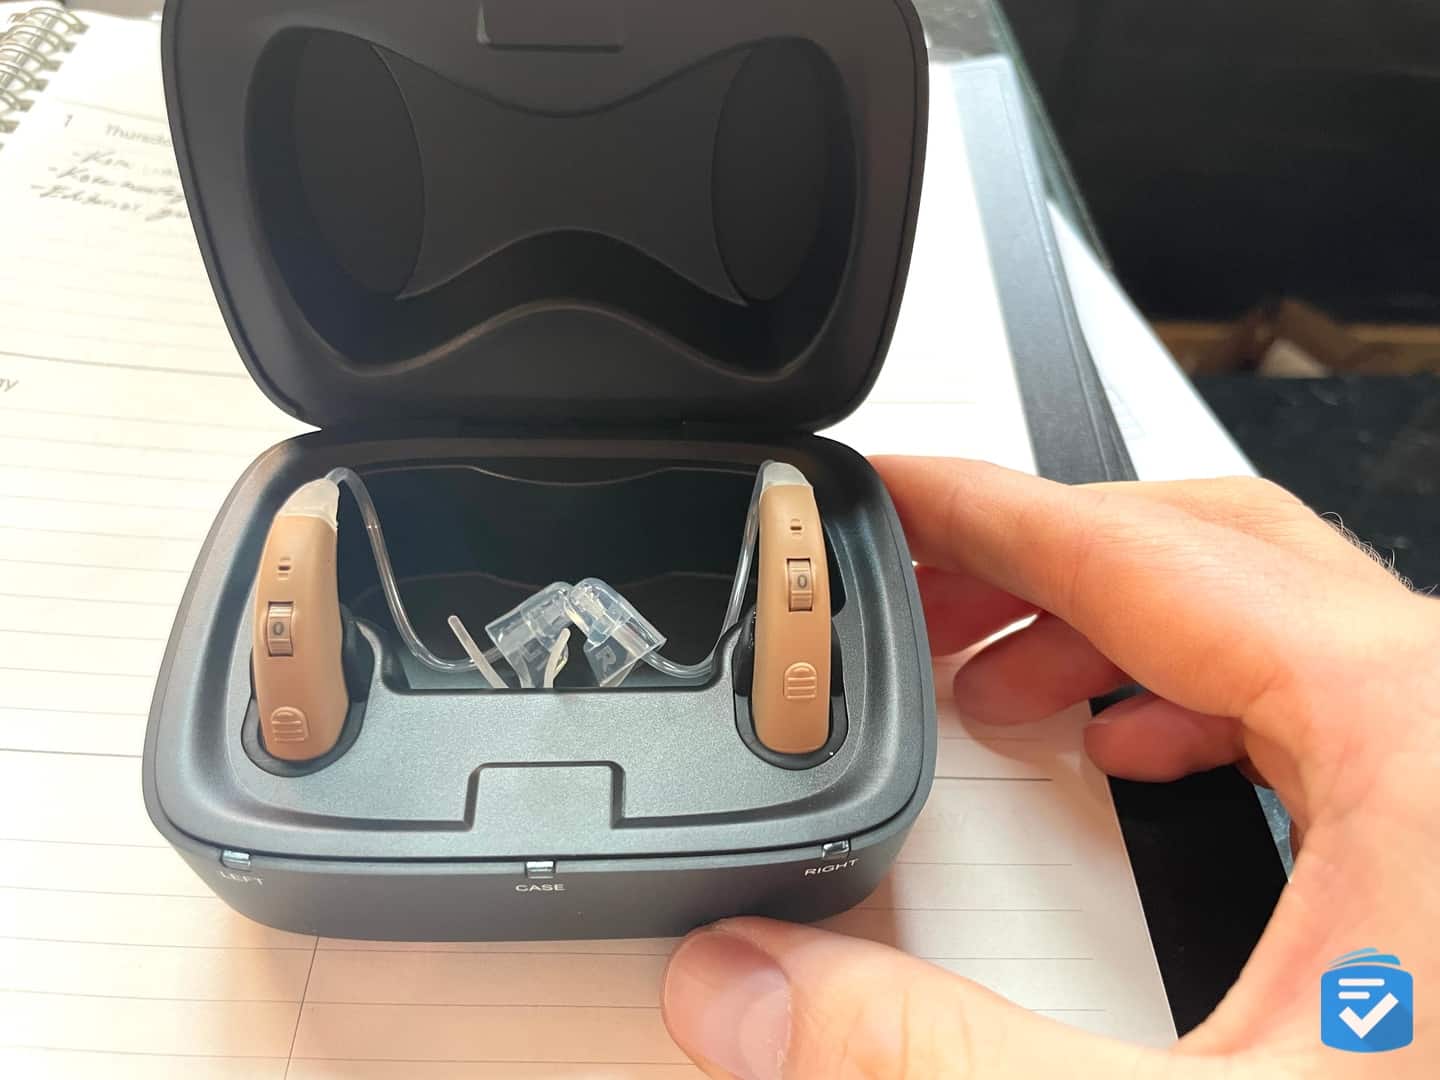 To charge the Volt hearing aids, you place them in the charging case.